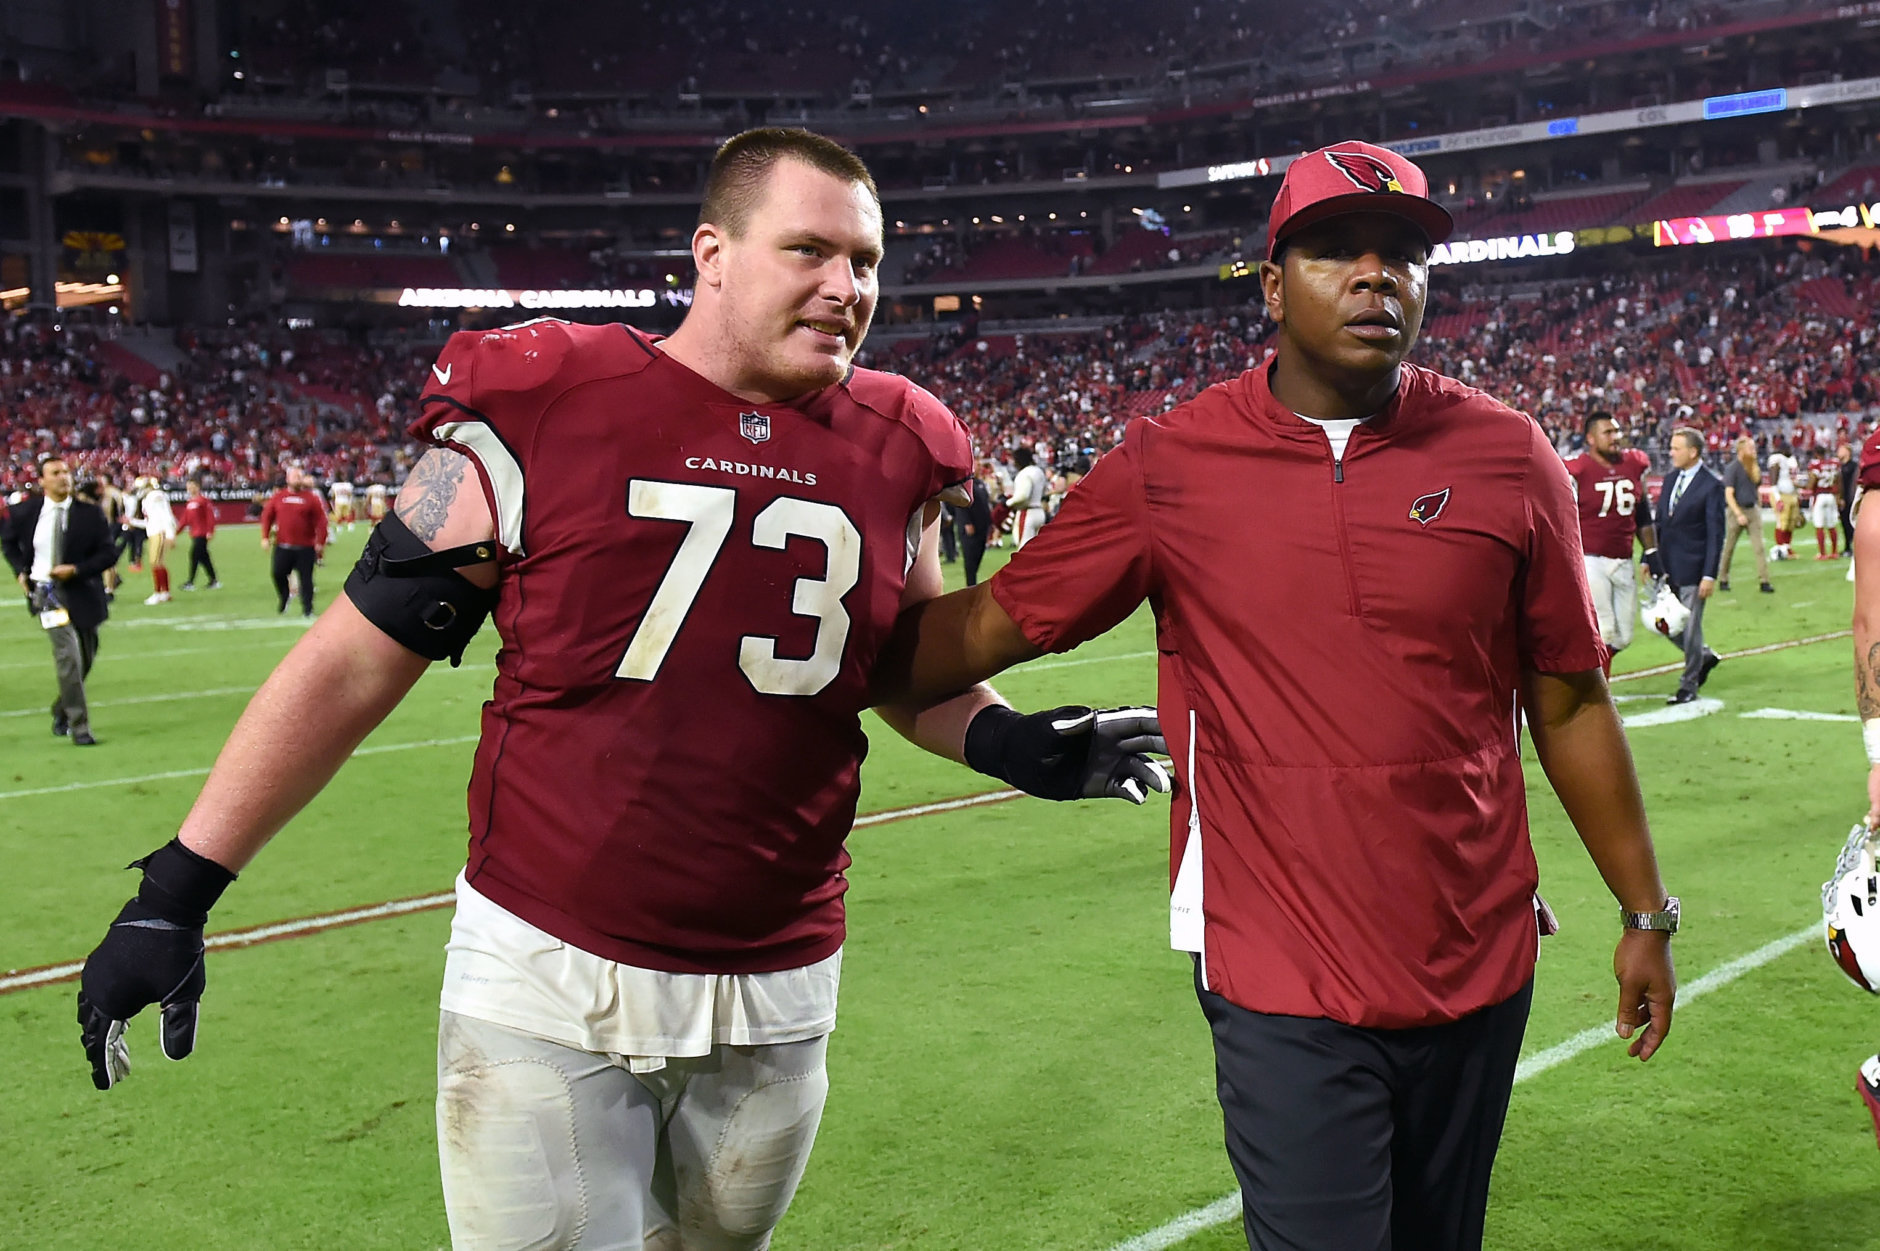 GLENDALE, AZ - OCTOBER 28:  Offensive coordinator Byron Leftwich and offensive guard John Wetzel #73 of the Arizona Cardinals walk off the field after the Cardinals beat the San Francisco 49ers 18-15 at State Farm Stadium on October 28, 2018 in Glendale, Arizona.  (Photo by Norm Hall/Getty Images)